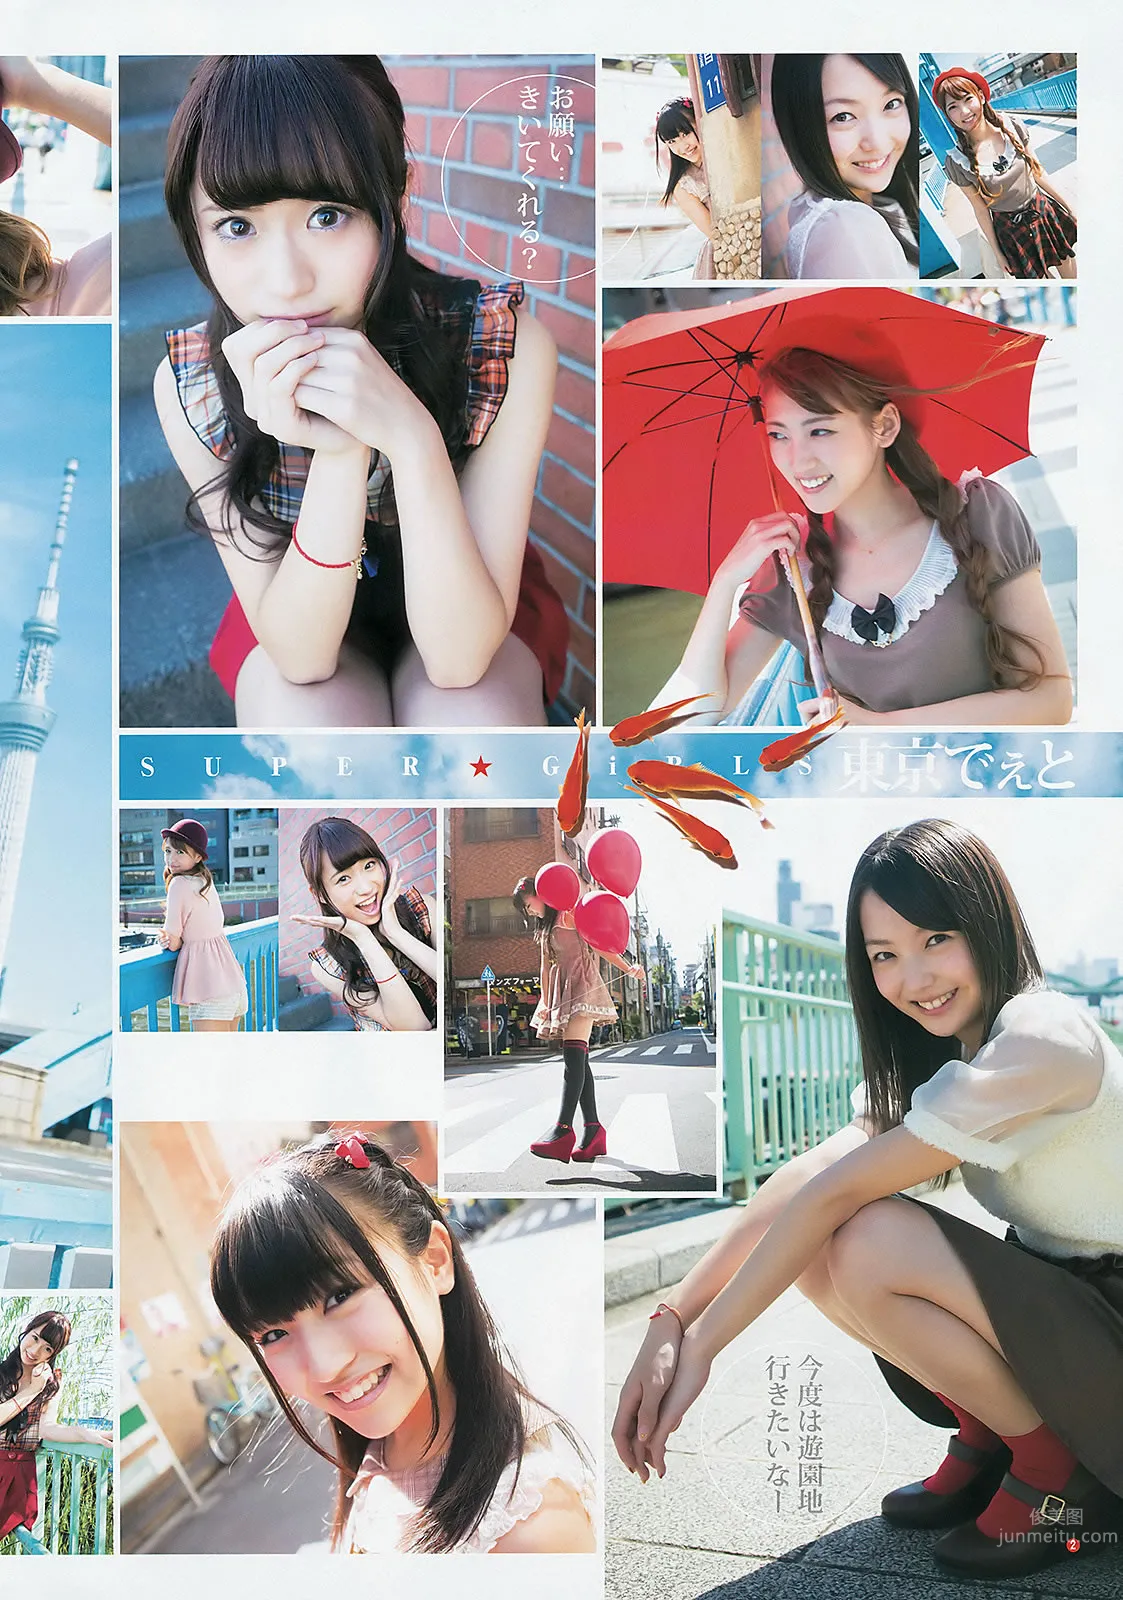 [Weekly Young Jump] 2012 No.45 46 SUPER☆GiRLS 佐々木もよこ 山本彩 松井咲子_5